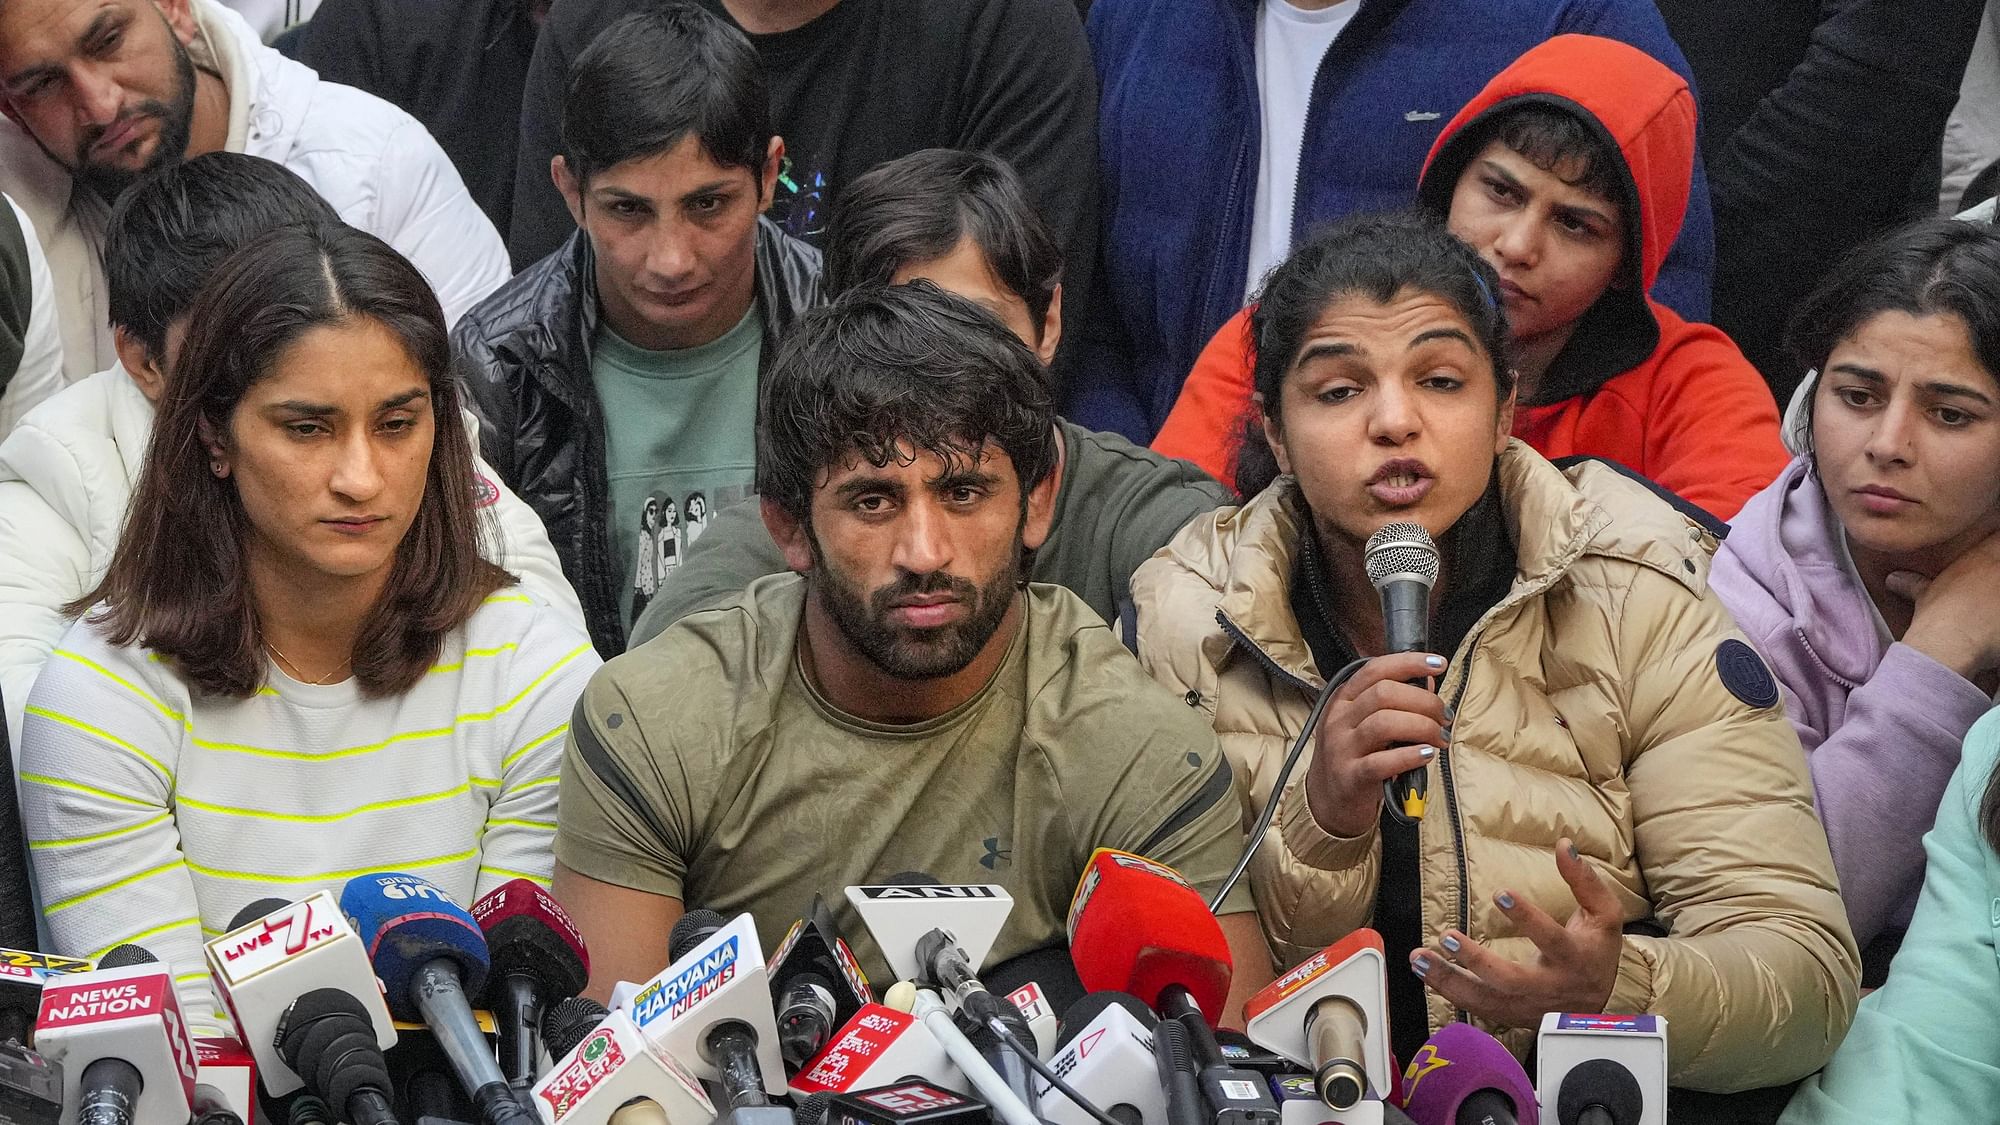 <div class="paragraphs"><p>Wrestlers Vinesh Phogat, Sakshi Malik and Bajrang Punia address a press conference after a meeting with officials of Union Sports Ministry regarding their protest against the Wrestling Federation of India (WFI), in New Delhi, Thursday, 19 January.</p></div>